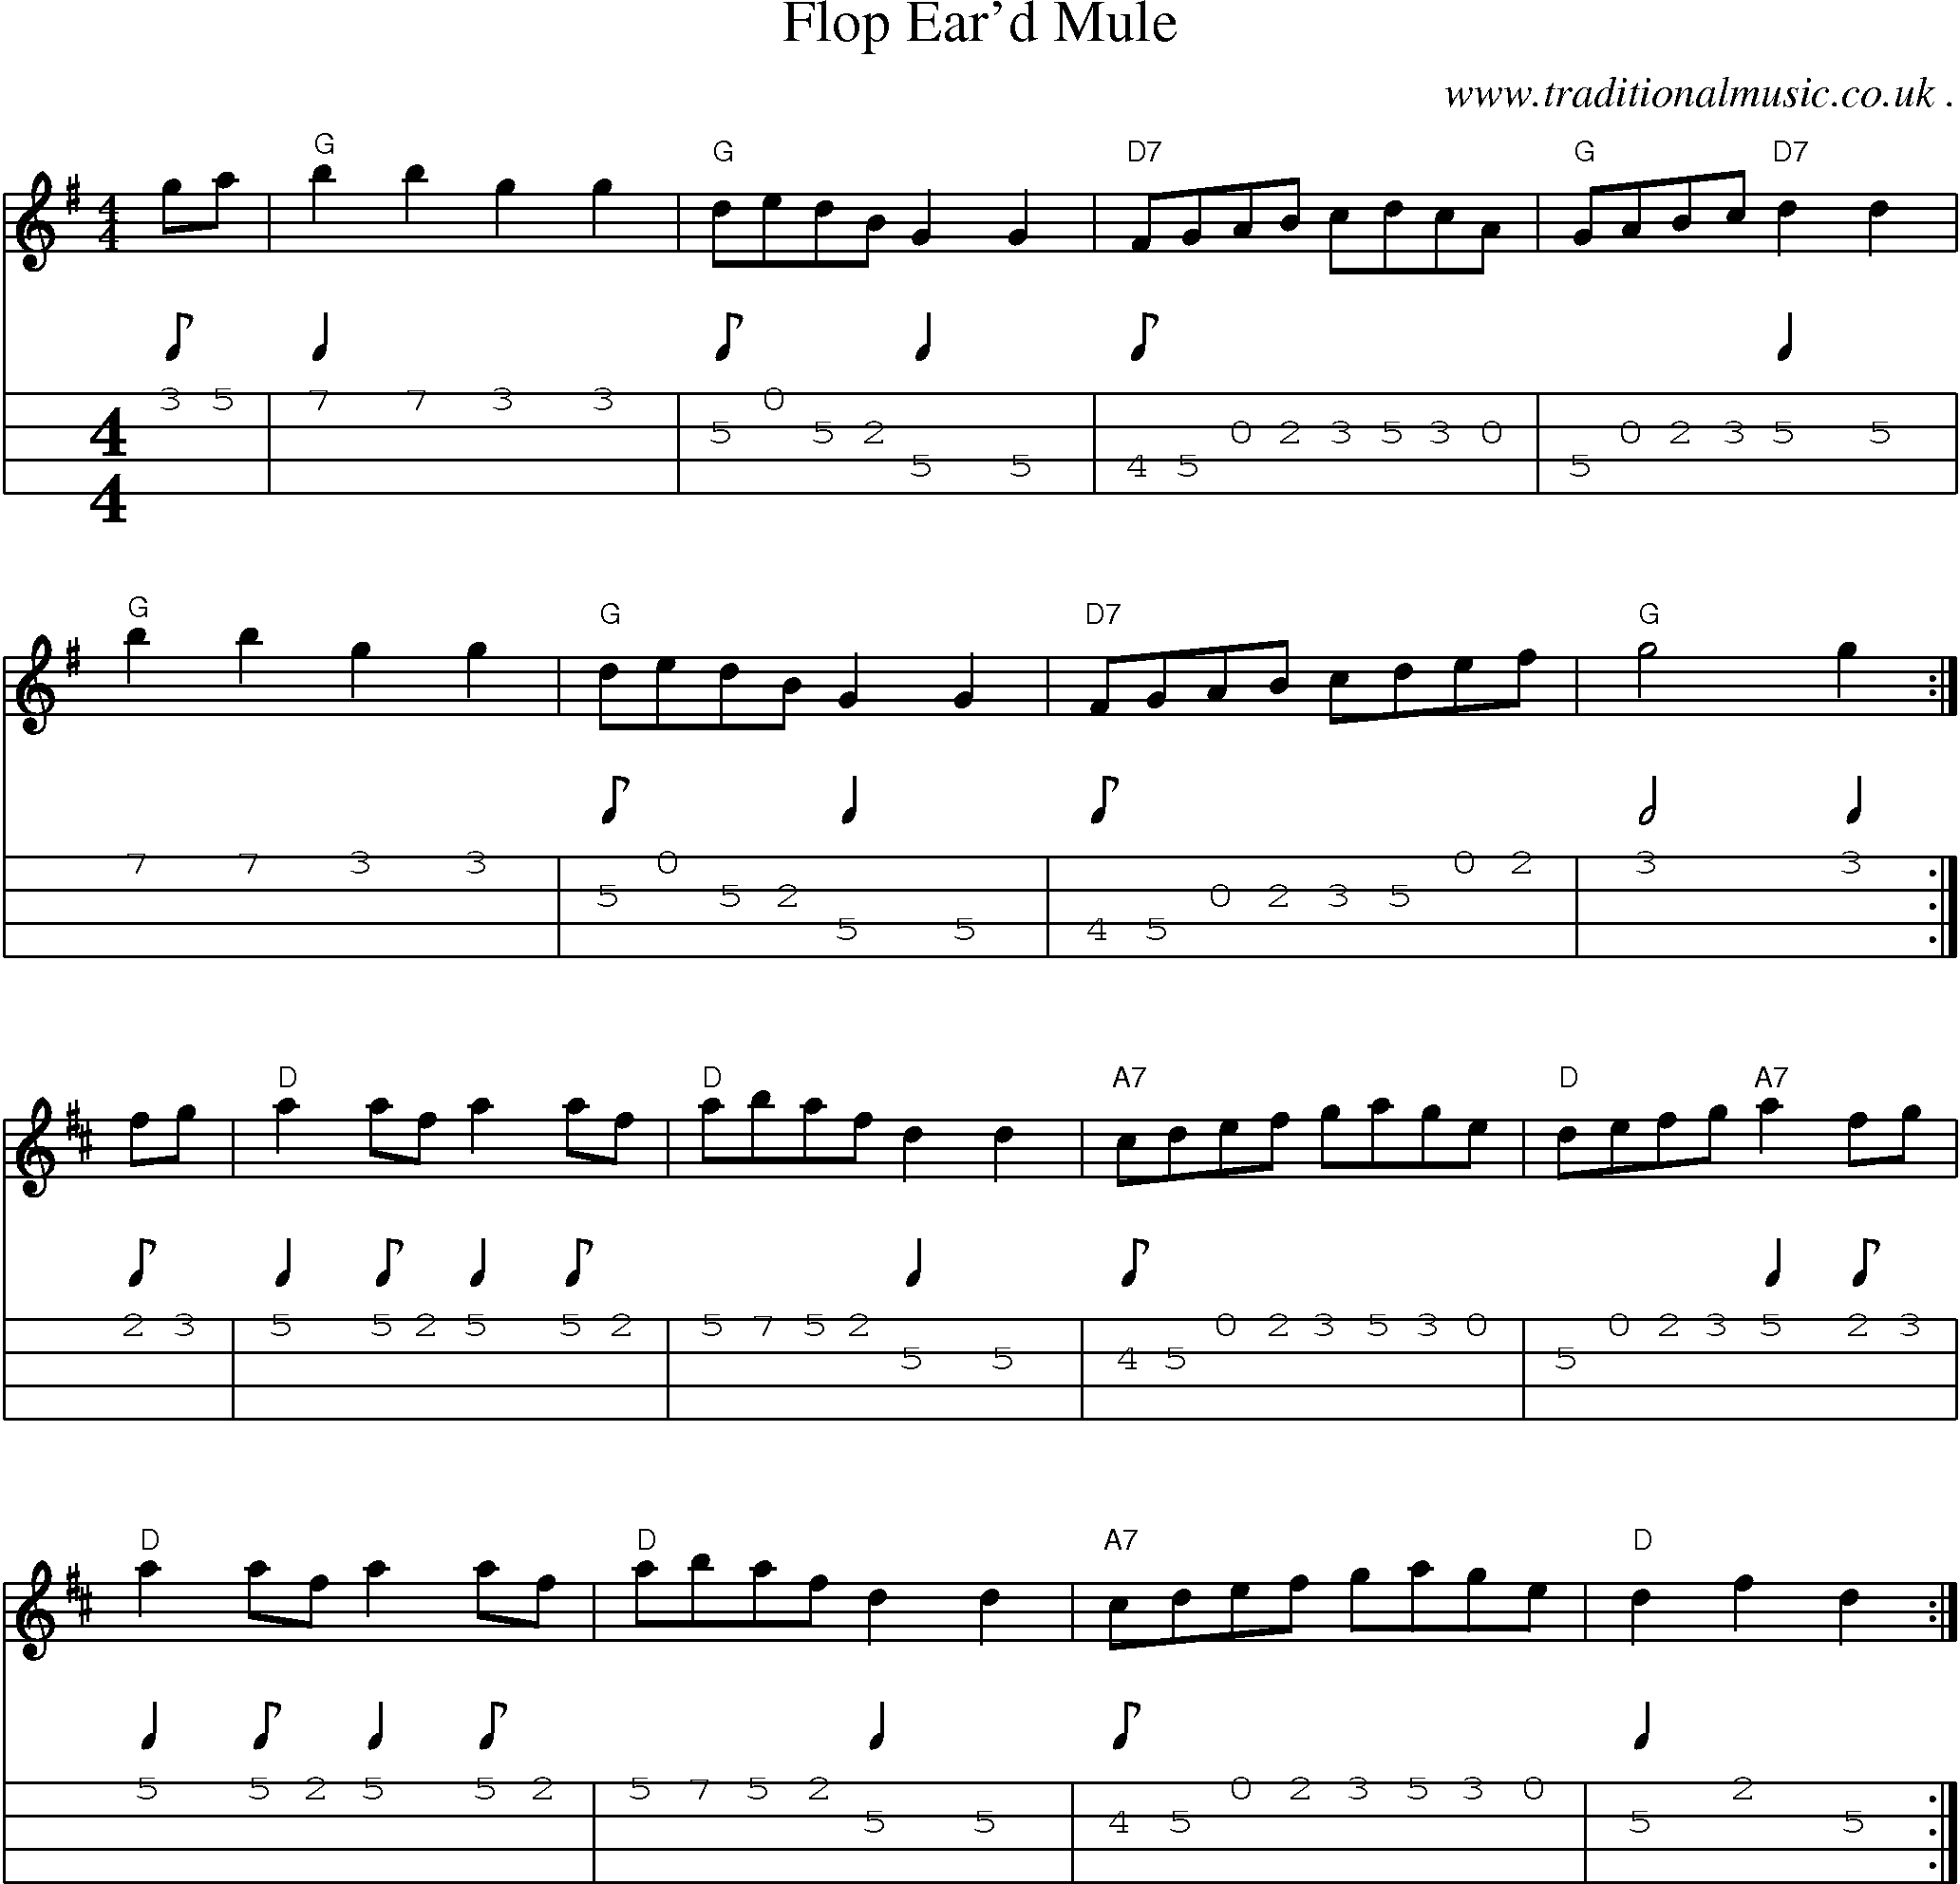 Music Score and Guitar Tabs for Flop Eard Mule 1